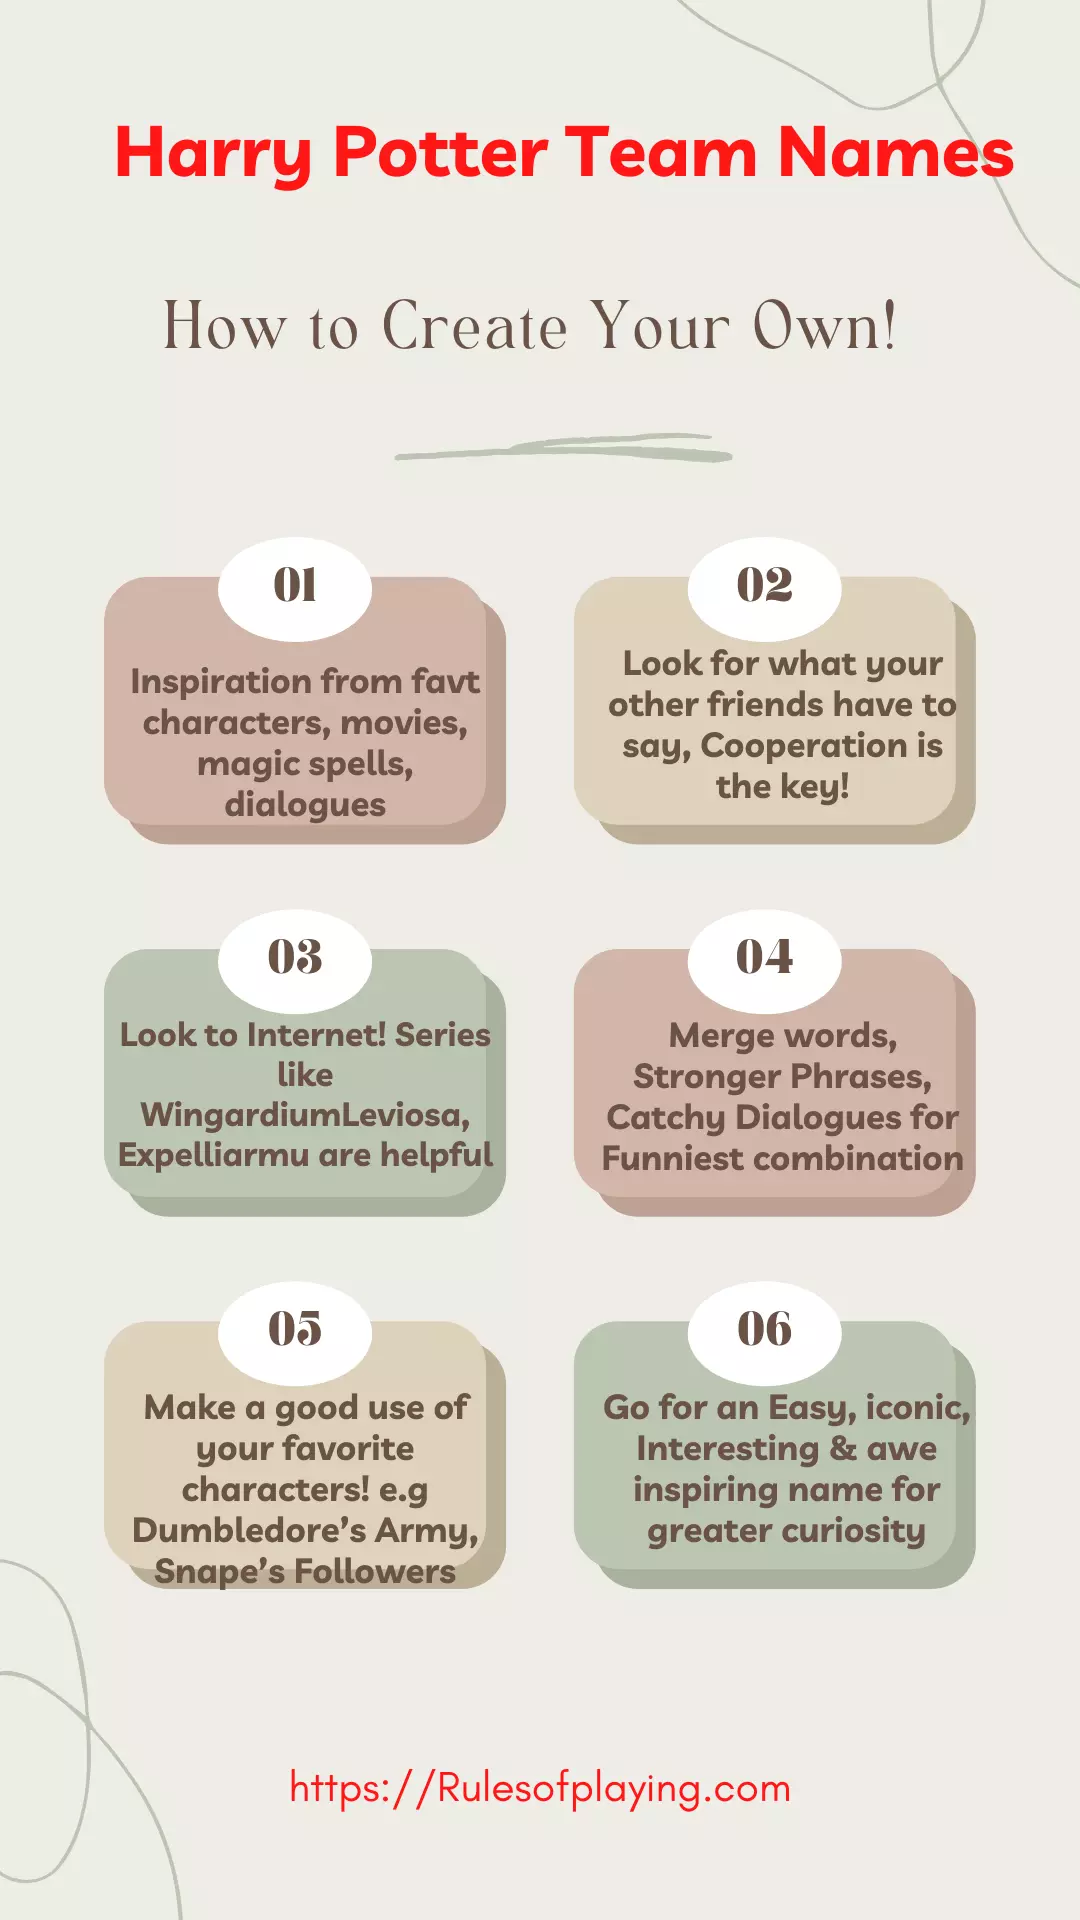 How to Create your own harry potter team Name- Harry Potter Team Names